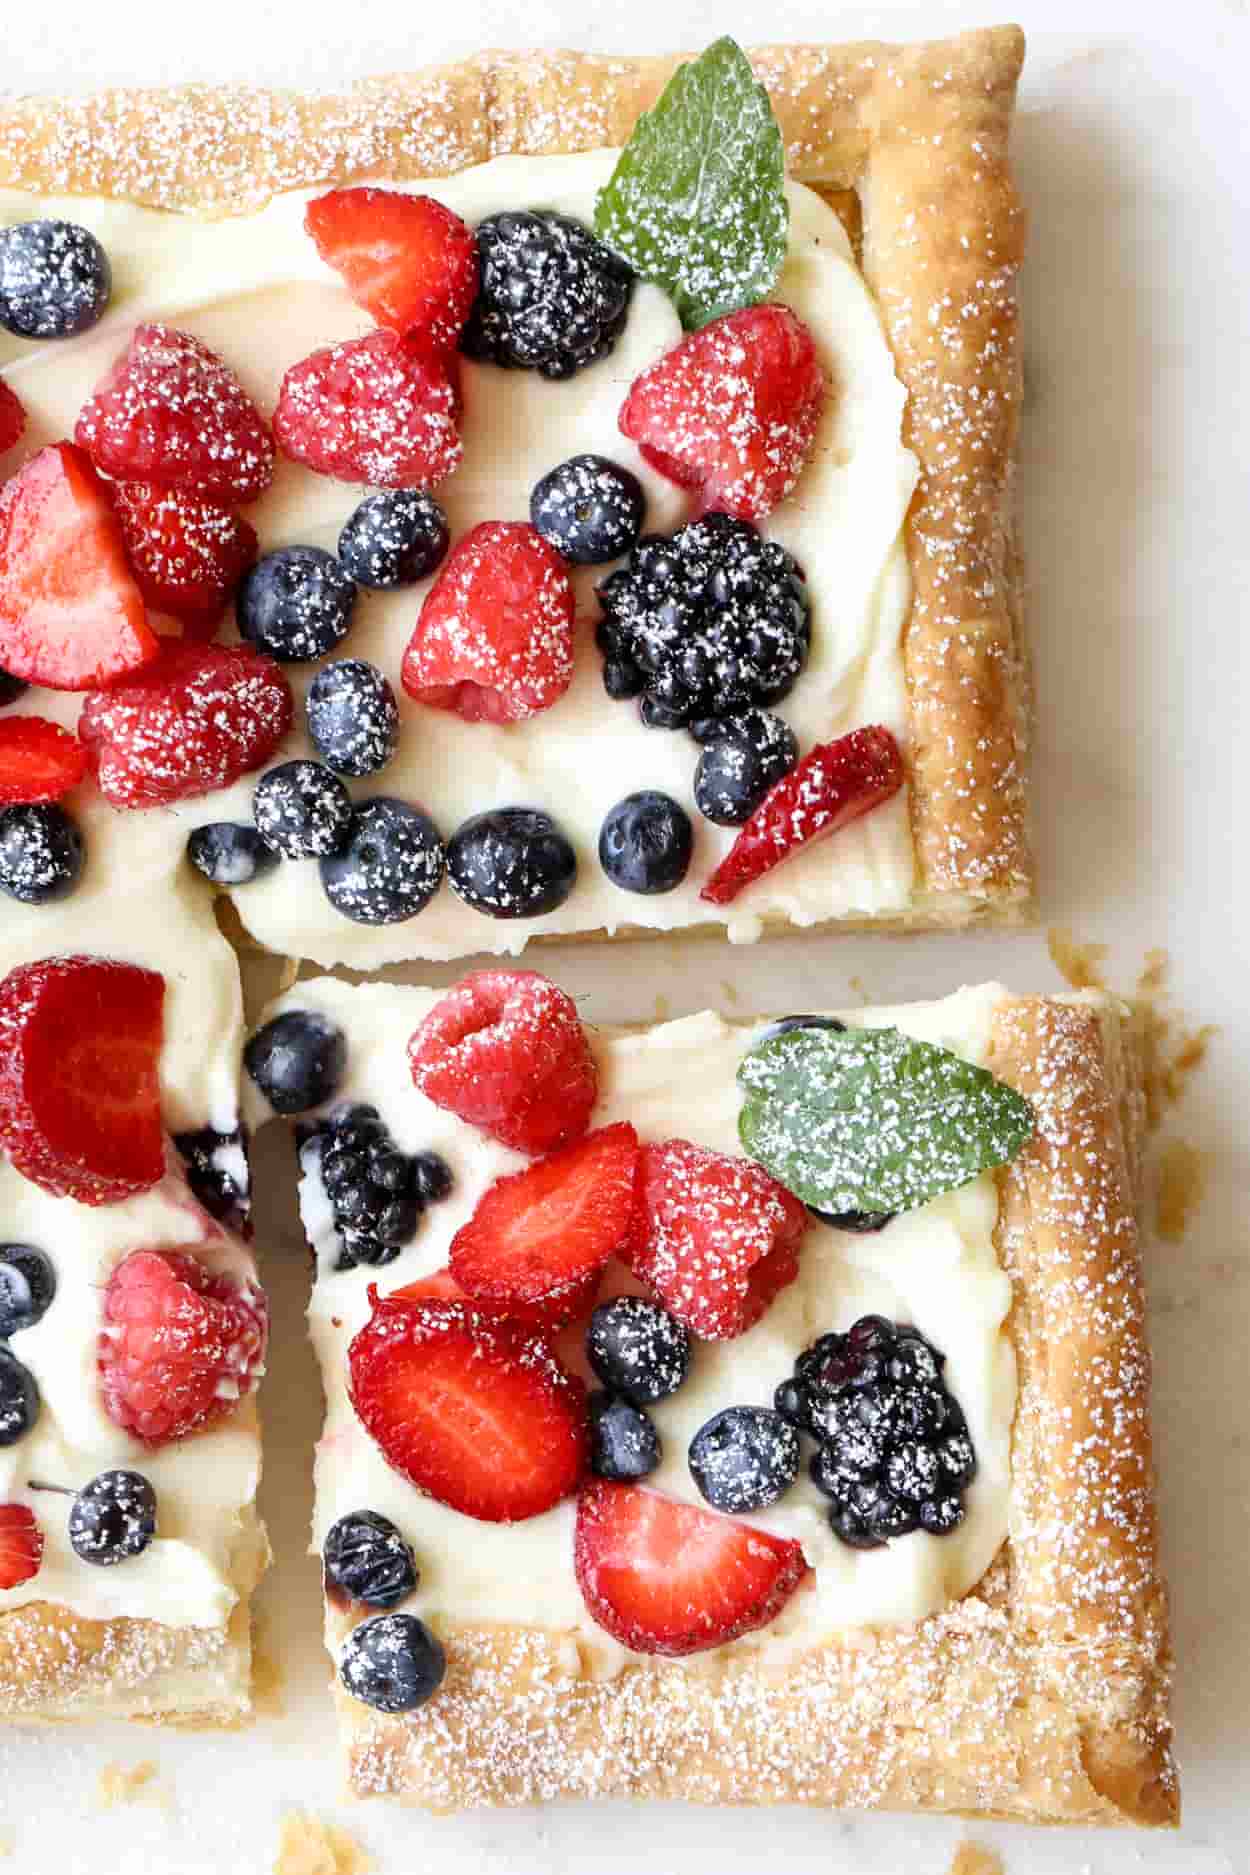 Puff Pastry Fruit Tarts with Ricotta Cream Filling - Cooking Classy